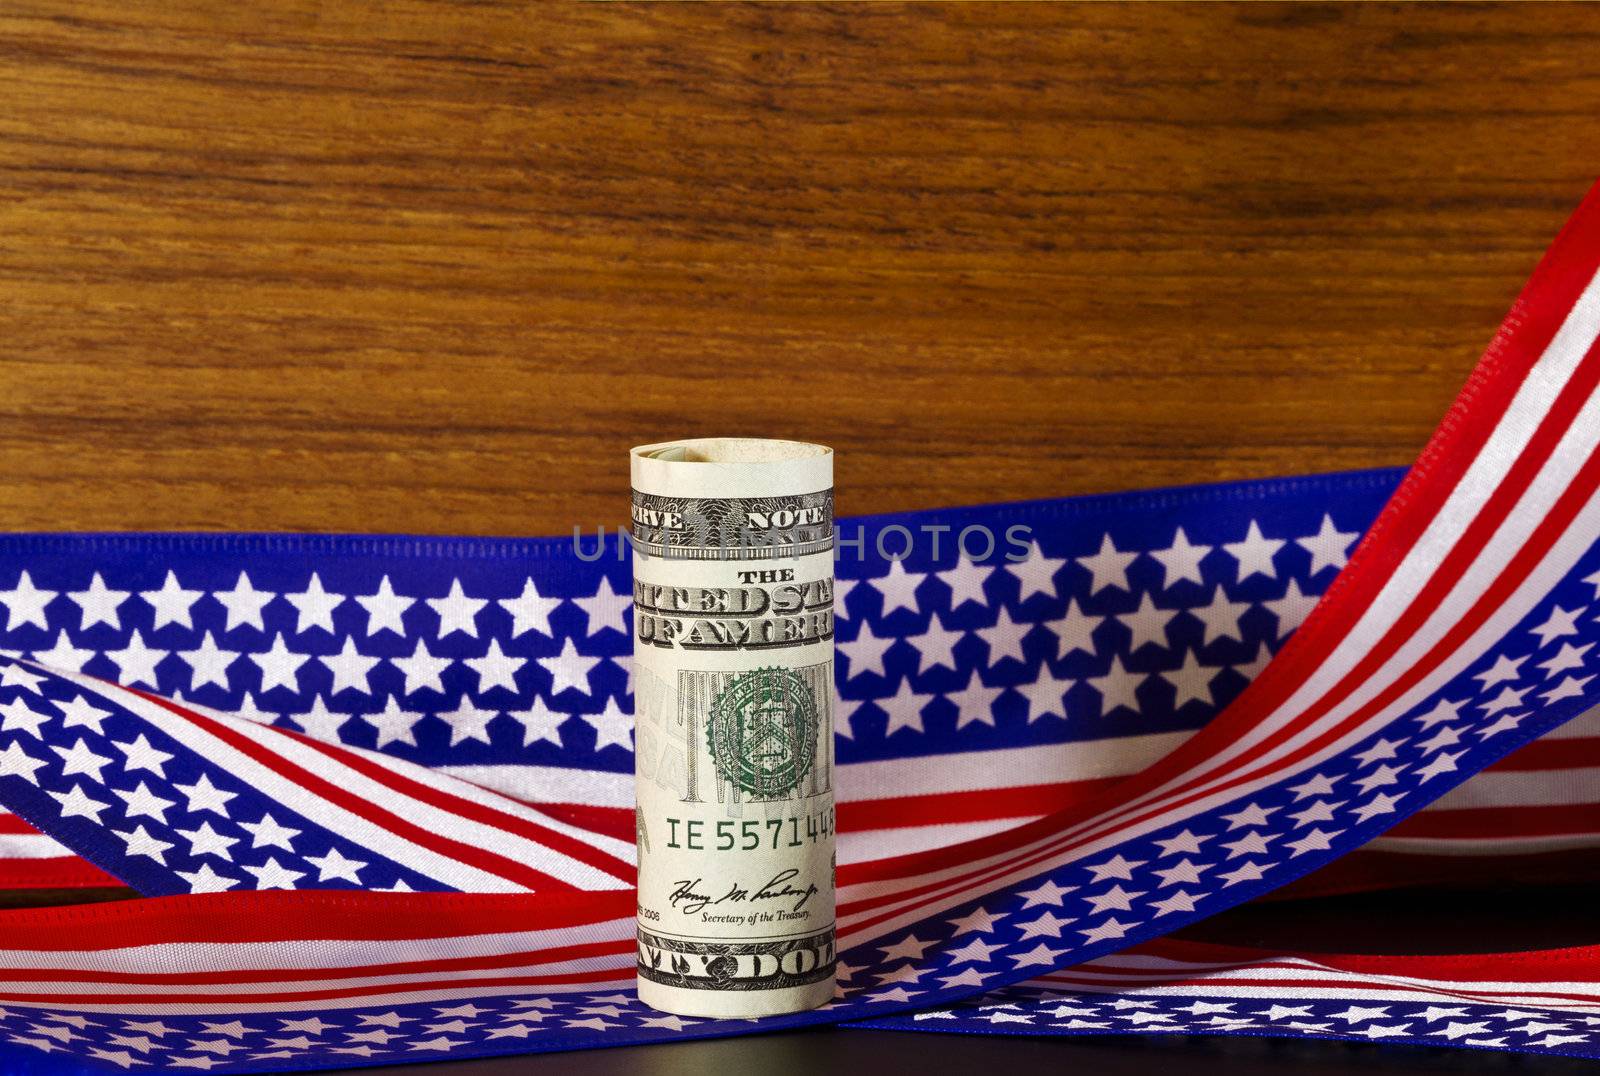 American currency placed in front of stars and stripes ribbon that picks up on USA flag motif.  Currency  suggests federal funding, on issues that impact the nation's economy or future.  Image suggests national investment or support of federal economic strategies. 